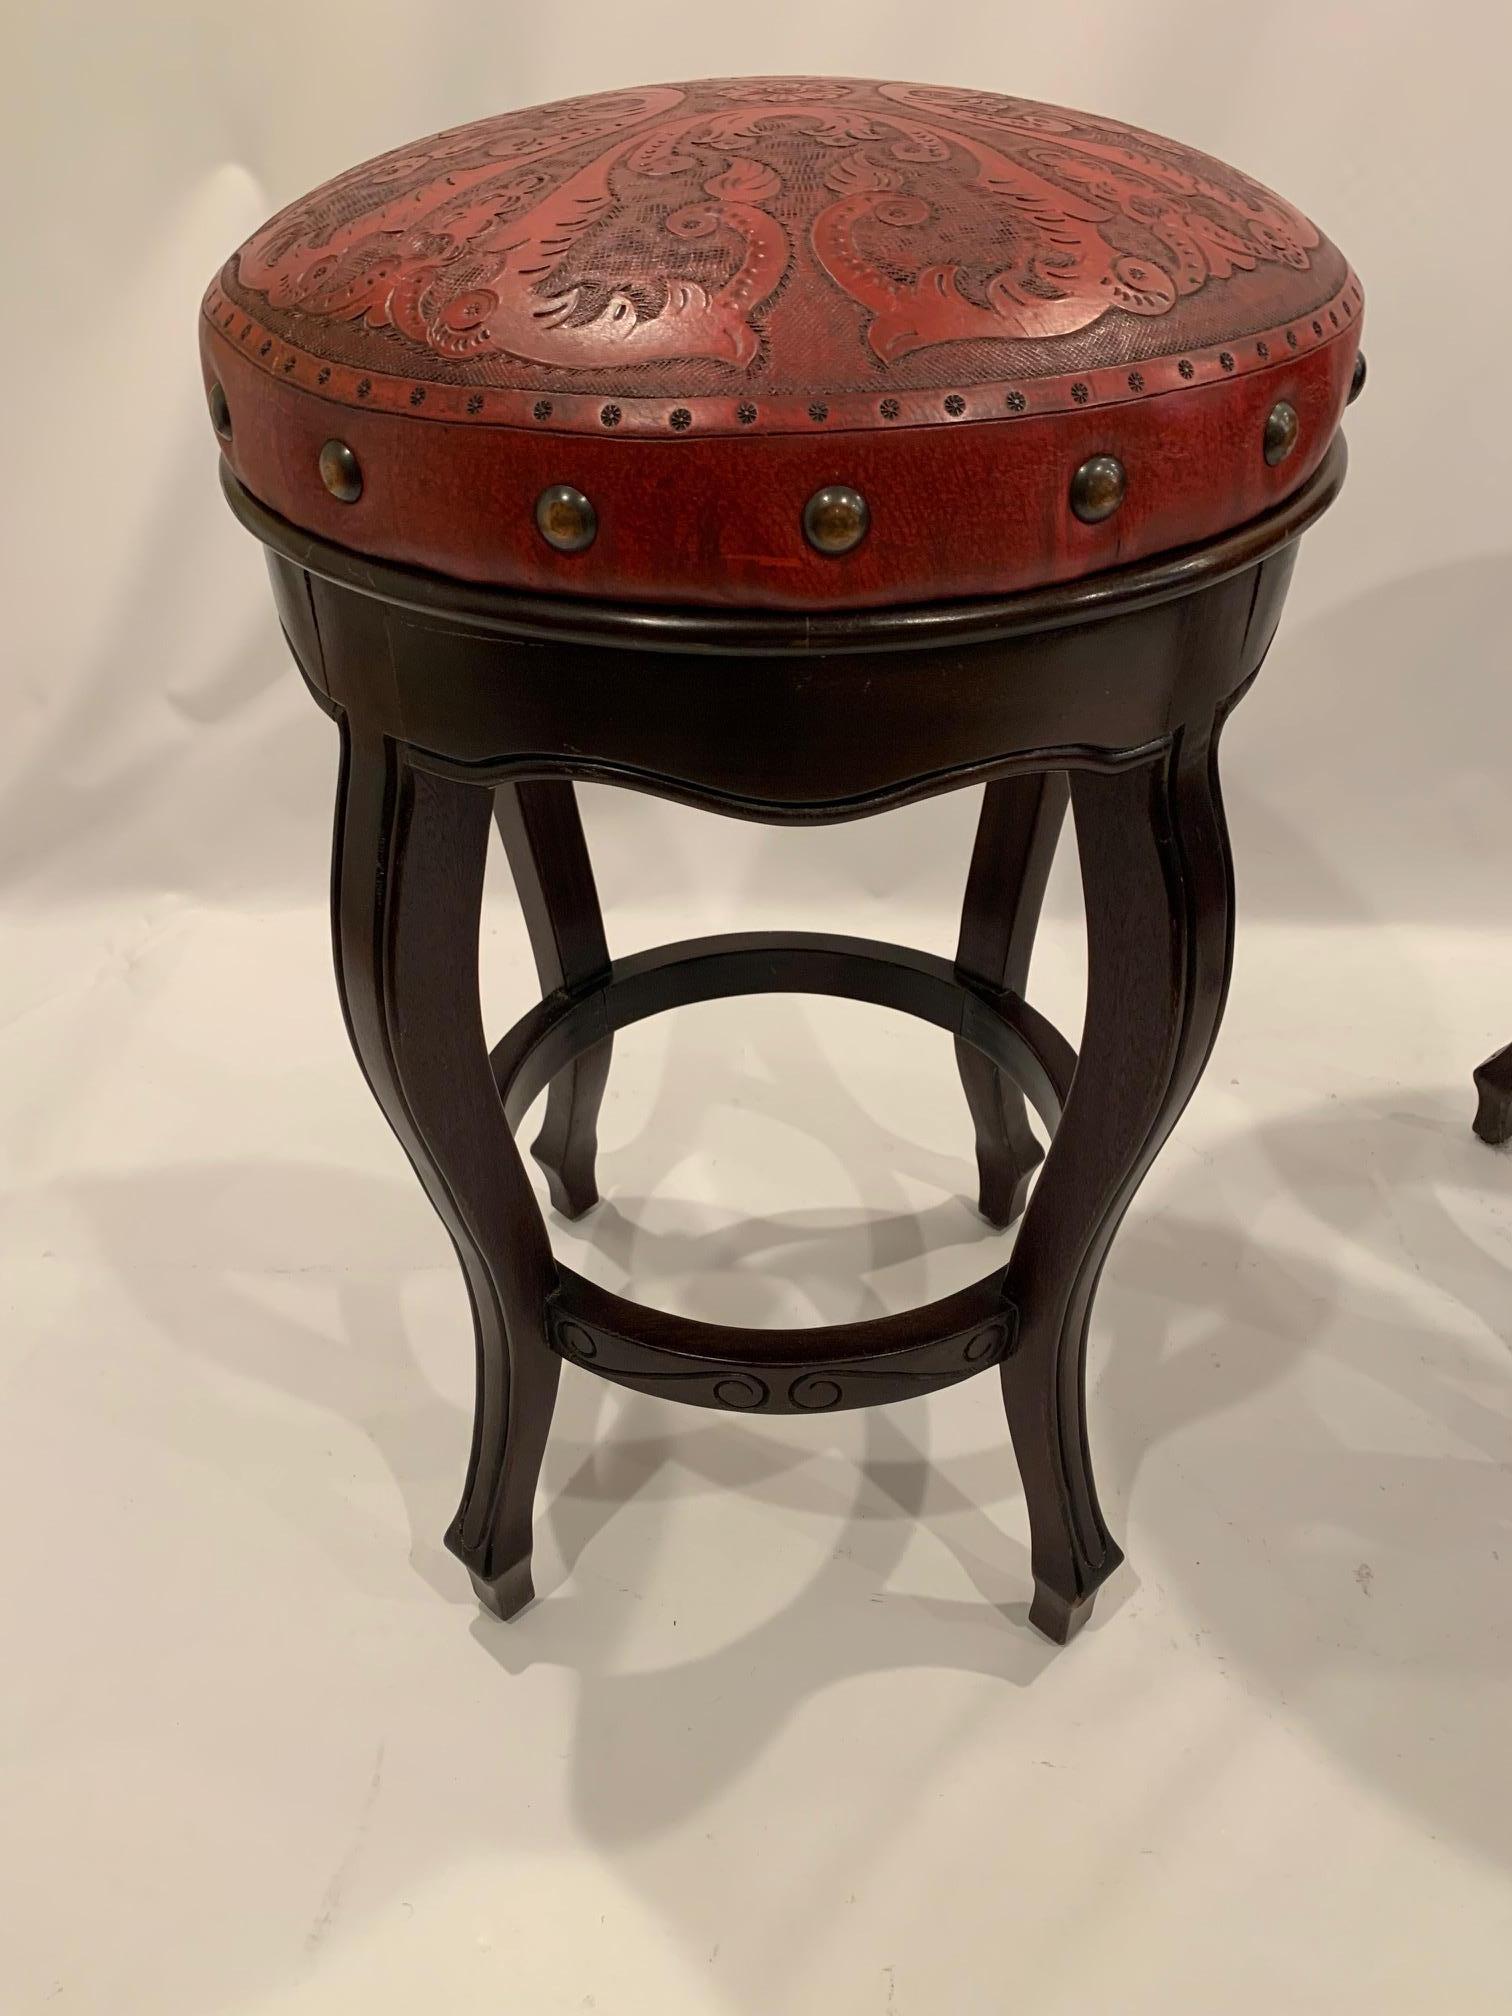 Rich Italian embossed leather bar stools in a marvelous orange red color, having large copper nail heads embellishing the periphery. Solid walnut bases.